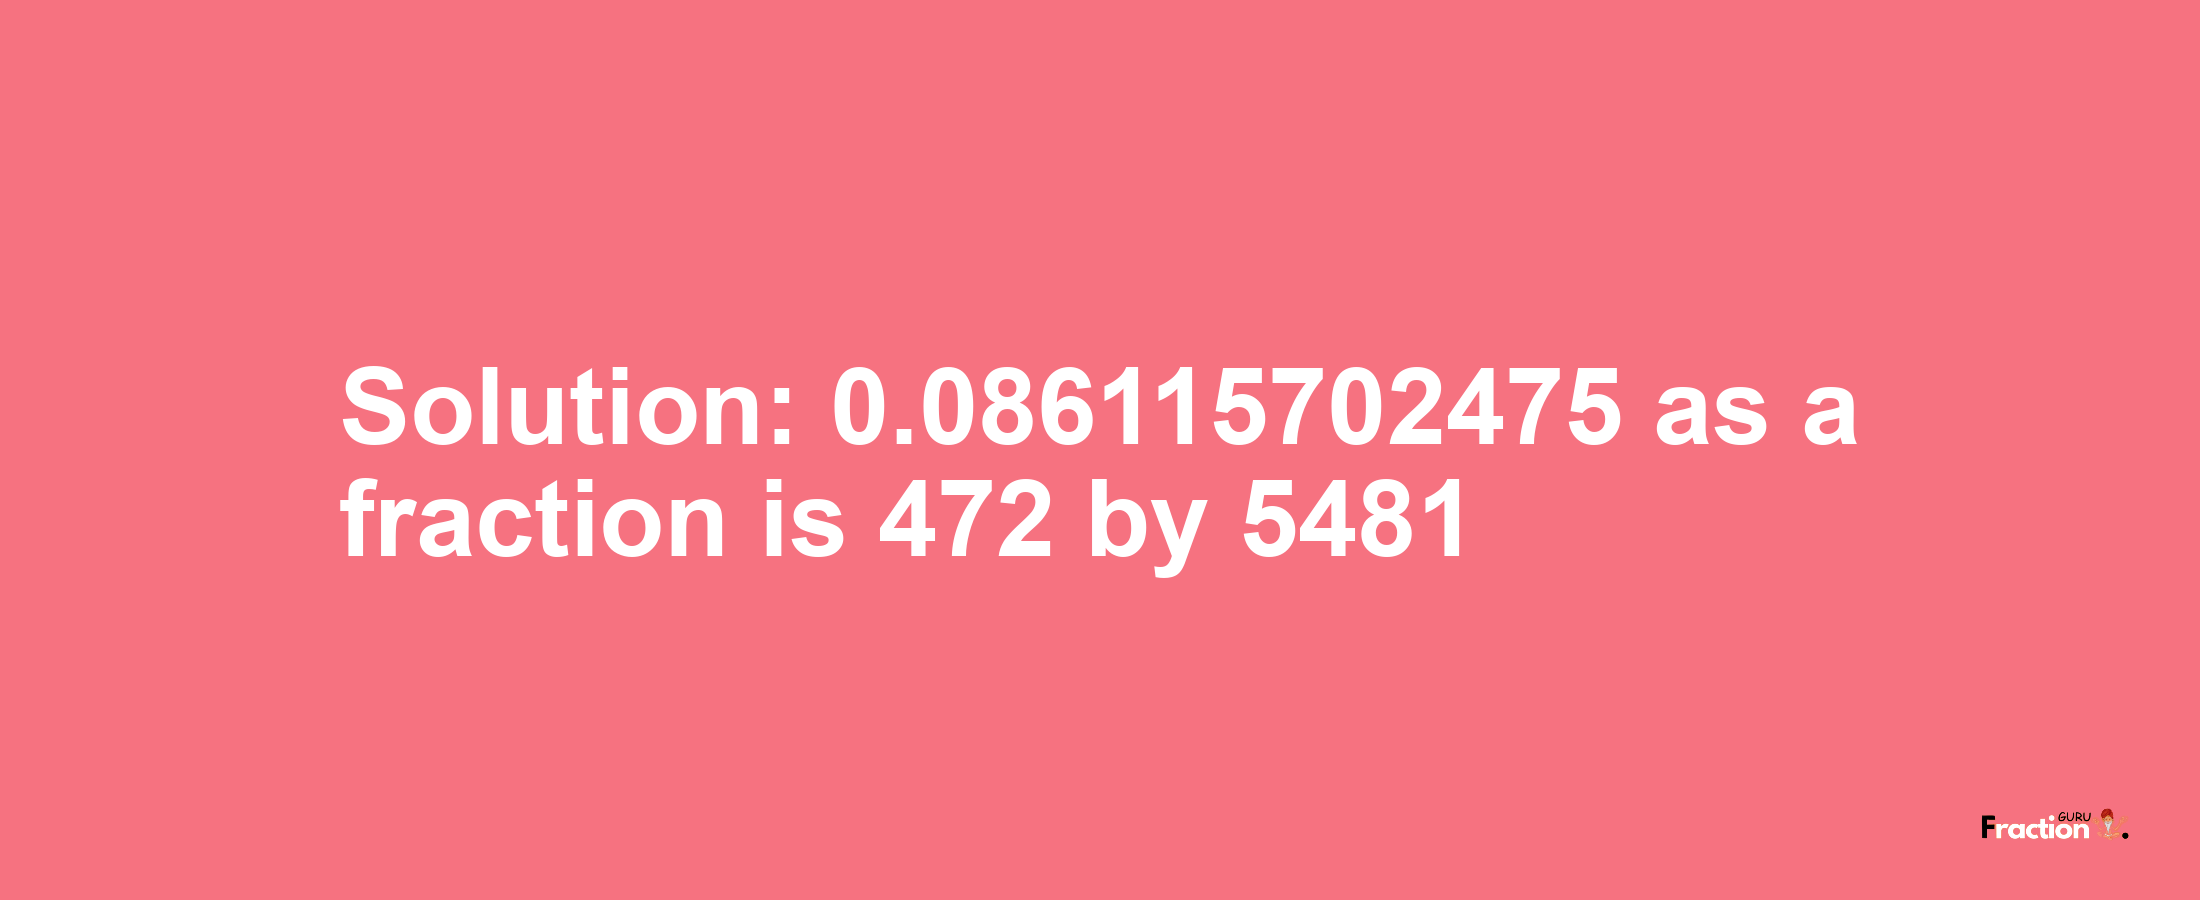 Solution:0.086115702475 as a fraction is 472/5481